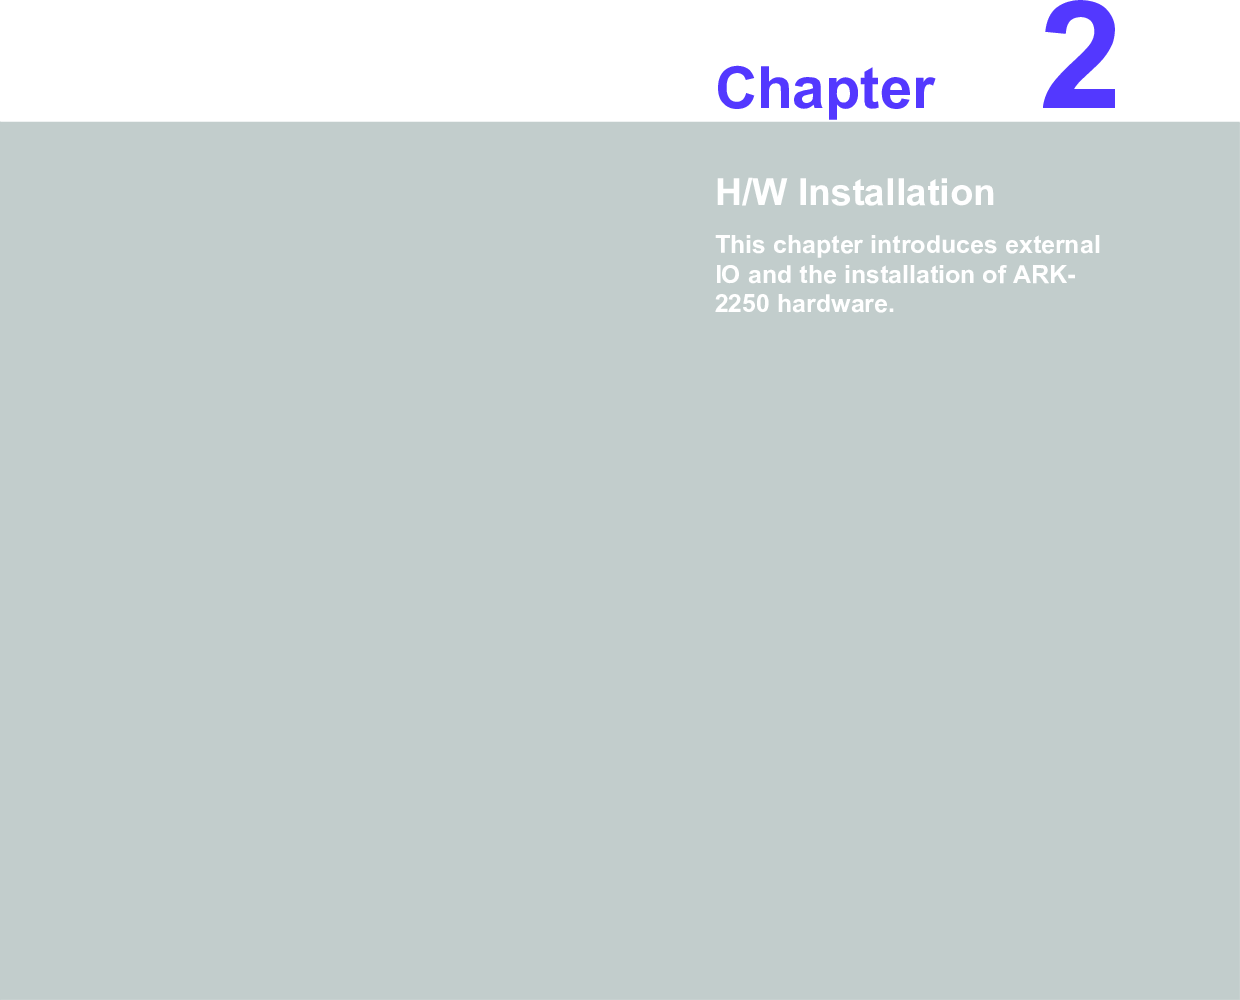 Chapter 22H/W InstallationThis chapter introduces external IO and the installation of ARK-2250 hardware.